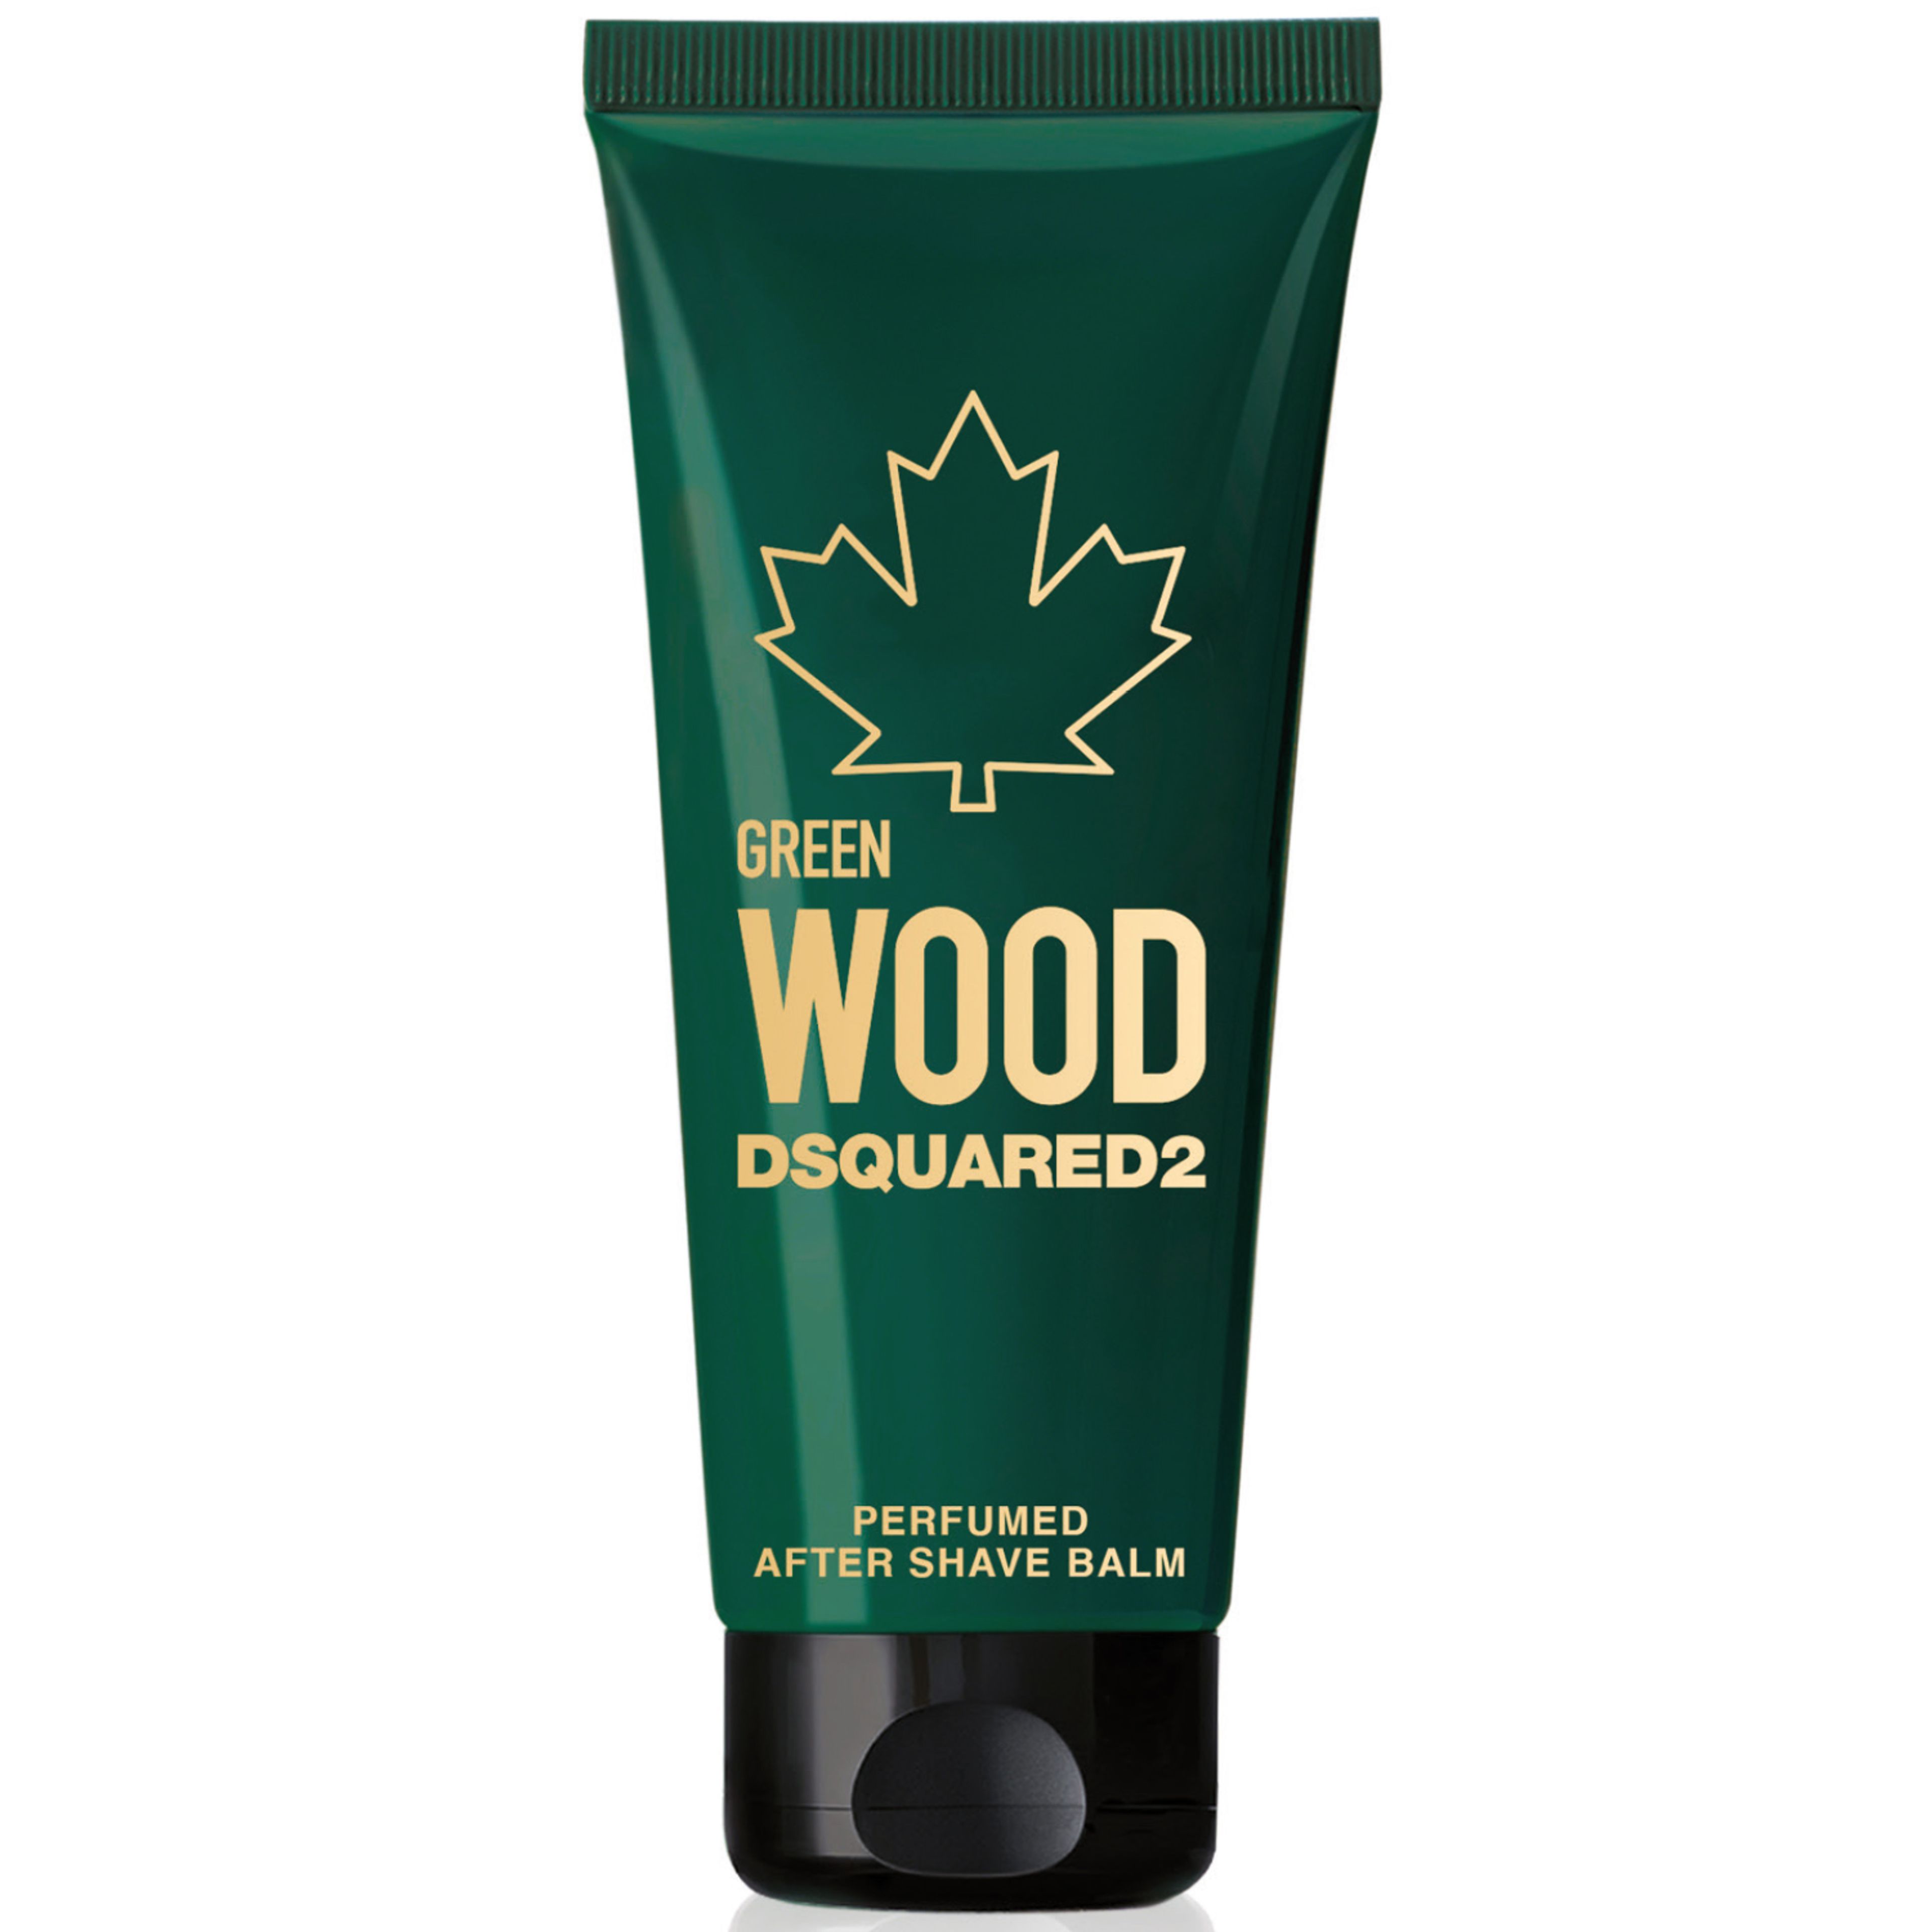 Dsquared2 Green Wood Pour Homme Perfumed After Shave Balm 1